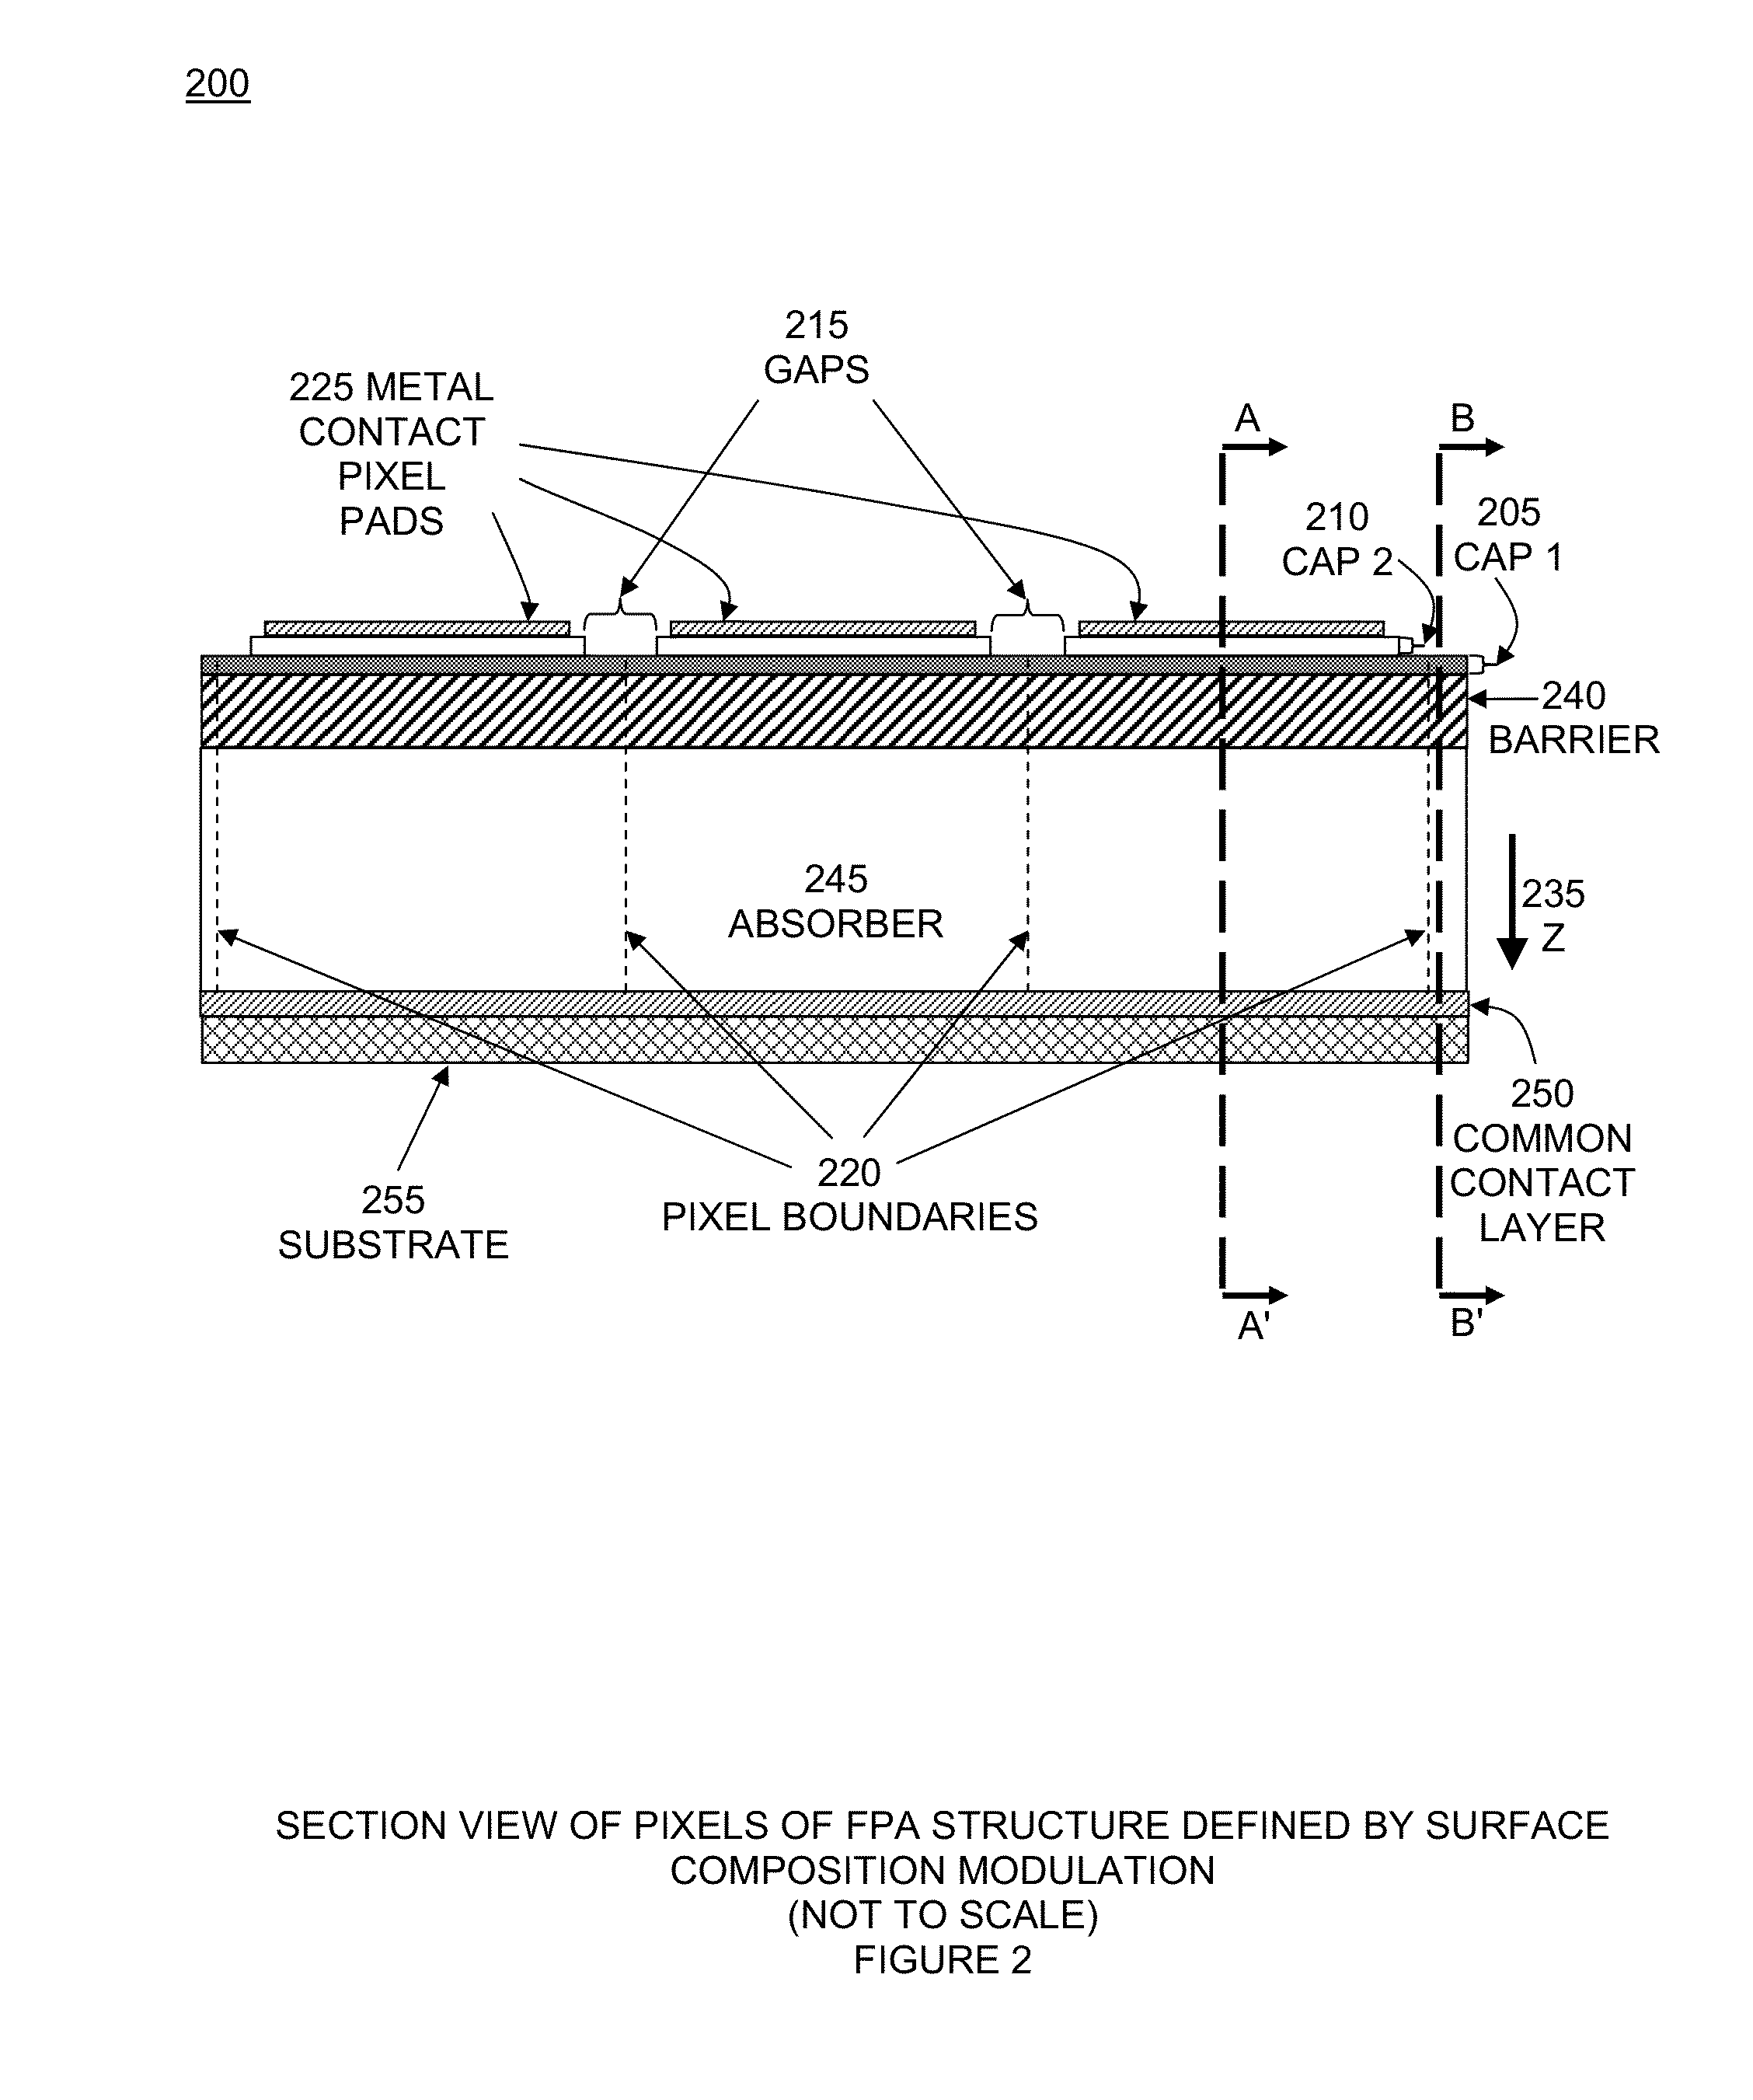 Focal plane array with pixels defined by modulation of surface fermi energy